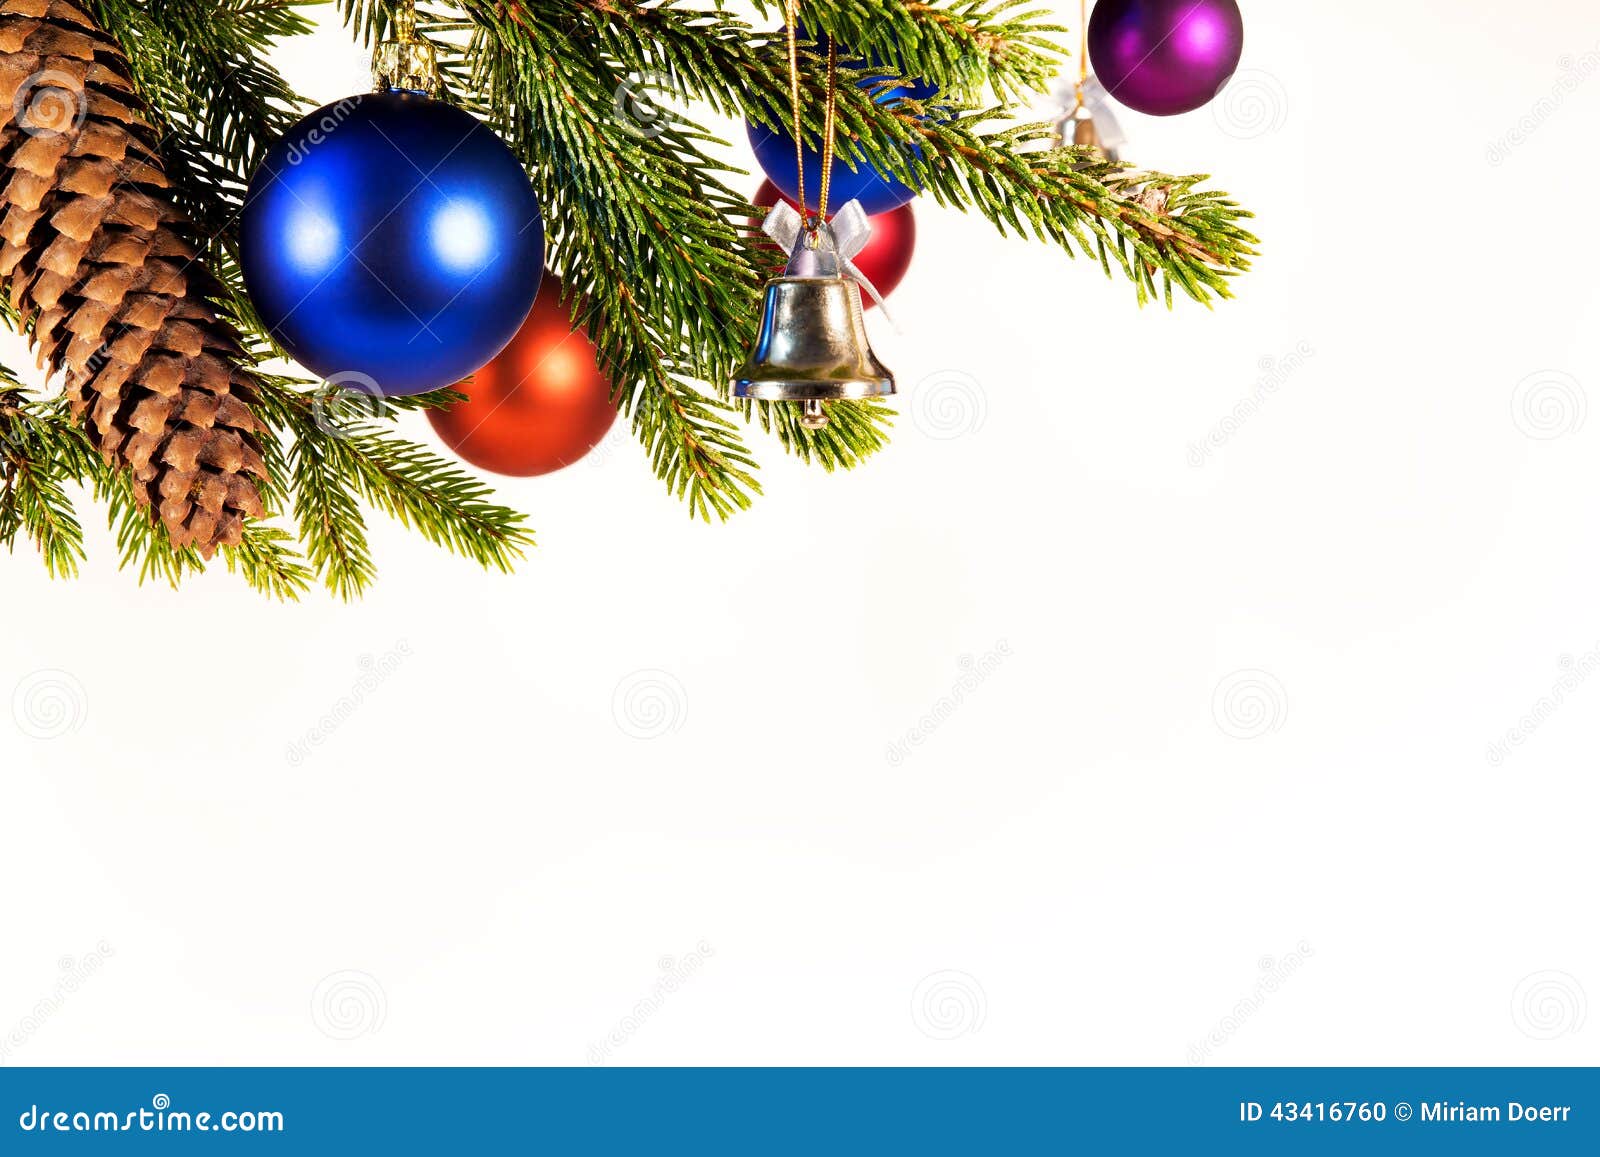 Christmas Background with Decoration Stock Photo - Image of brown ...